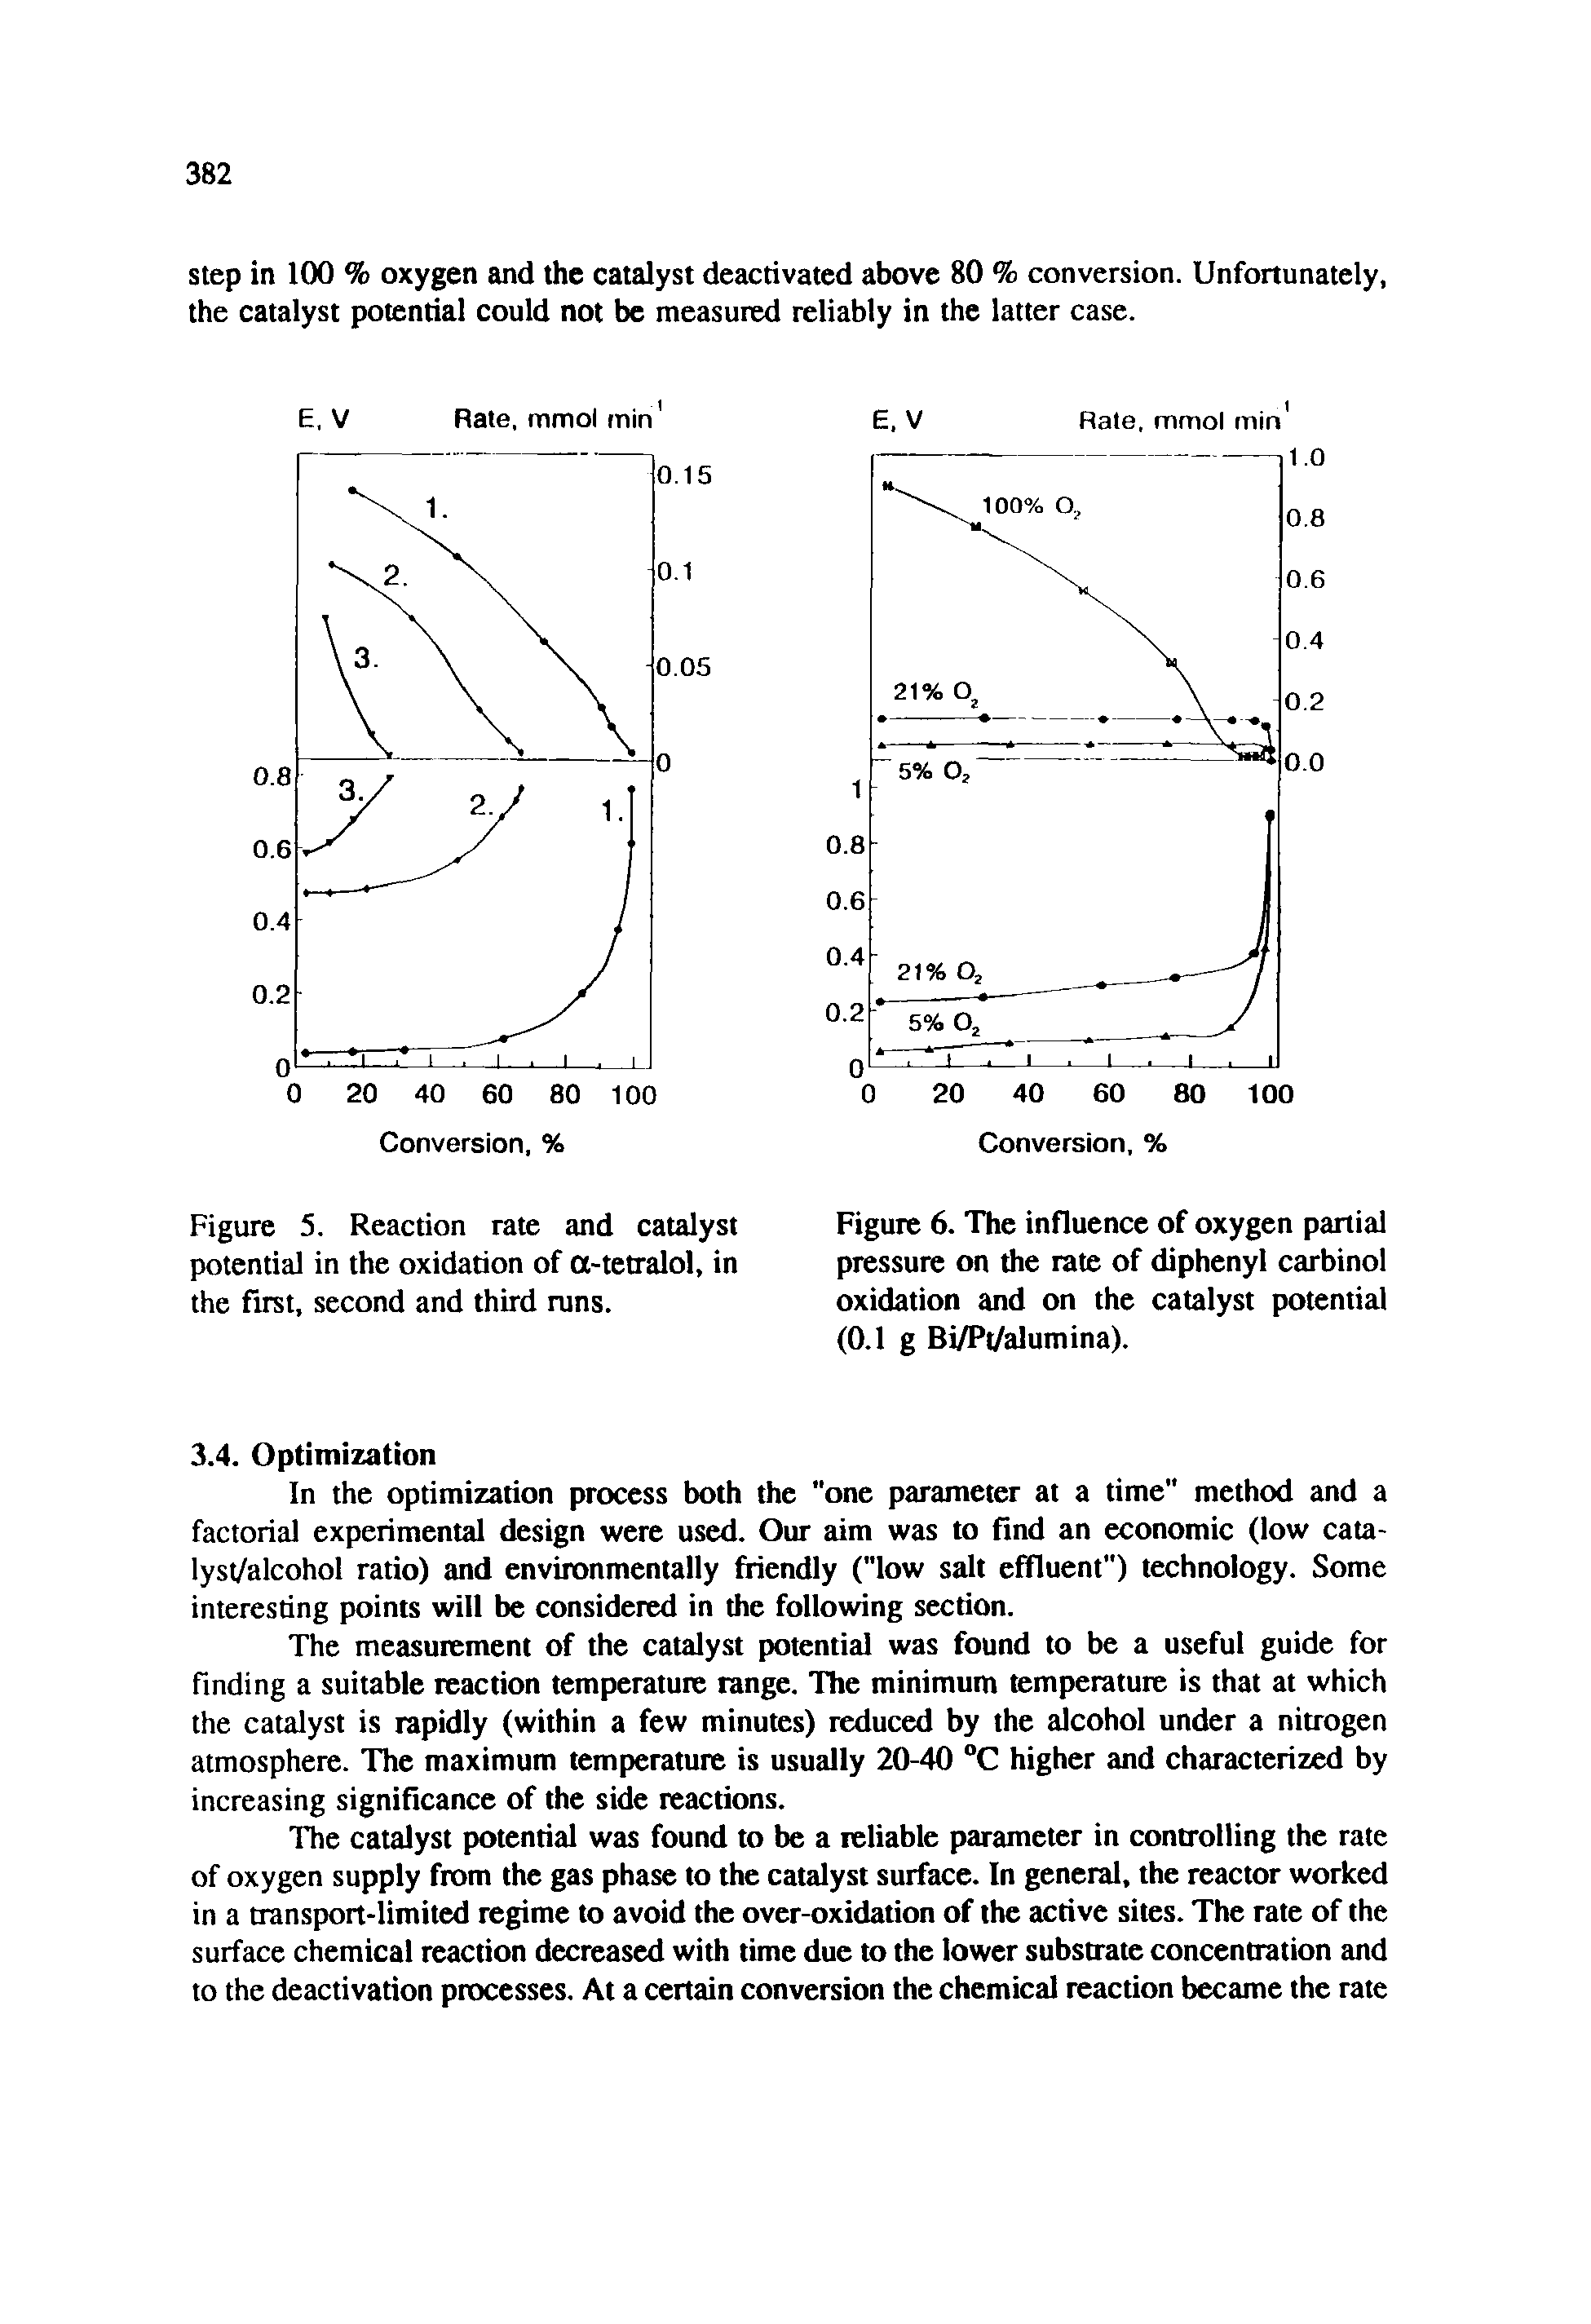 Figure 6. The influence of oxygen partial pressure on the rate of diphenyl carbinol oxidation and on the catalyst potential (0.1 g Bi/Pt/alumina).